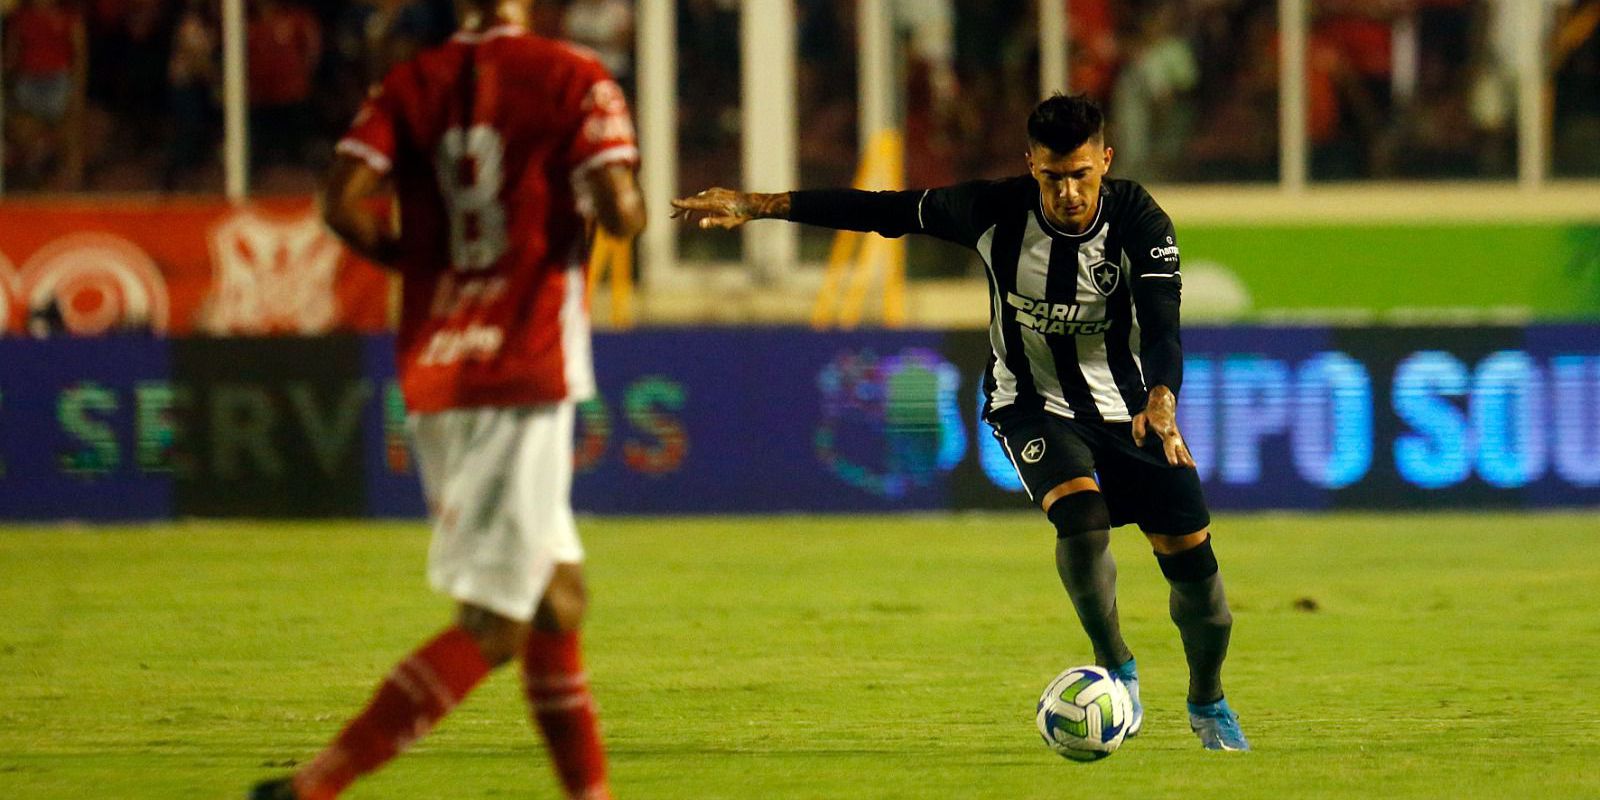 Copa do Brasil: Botafogo draws with Sergipe and qualifies